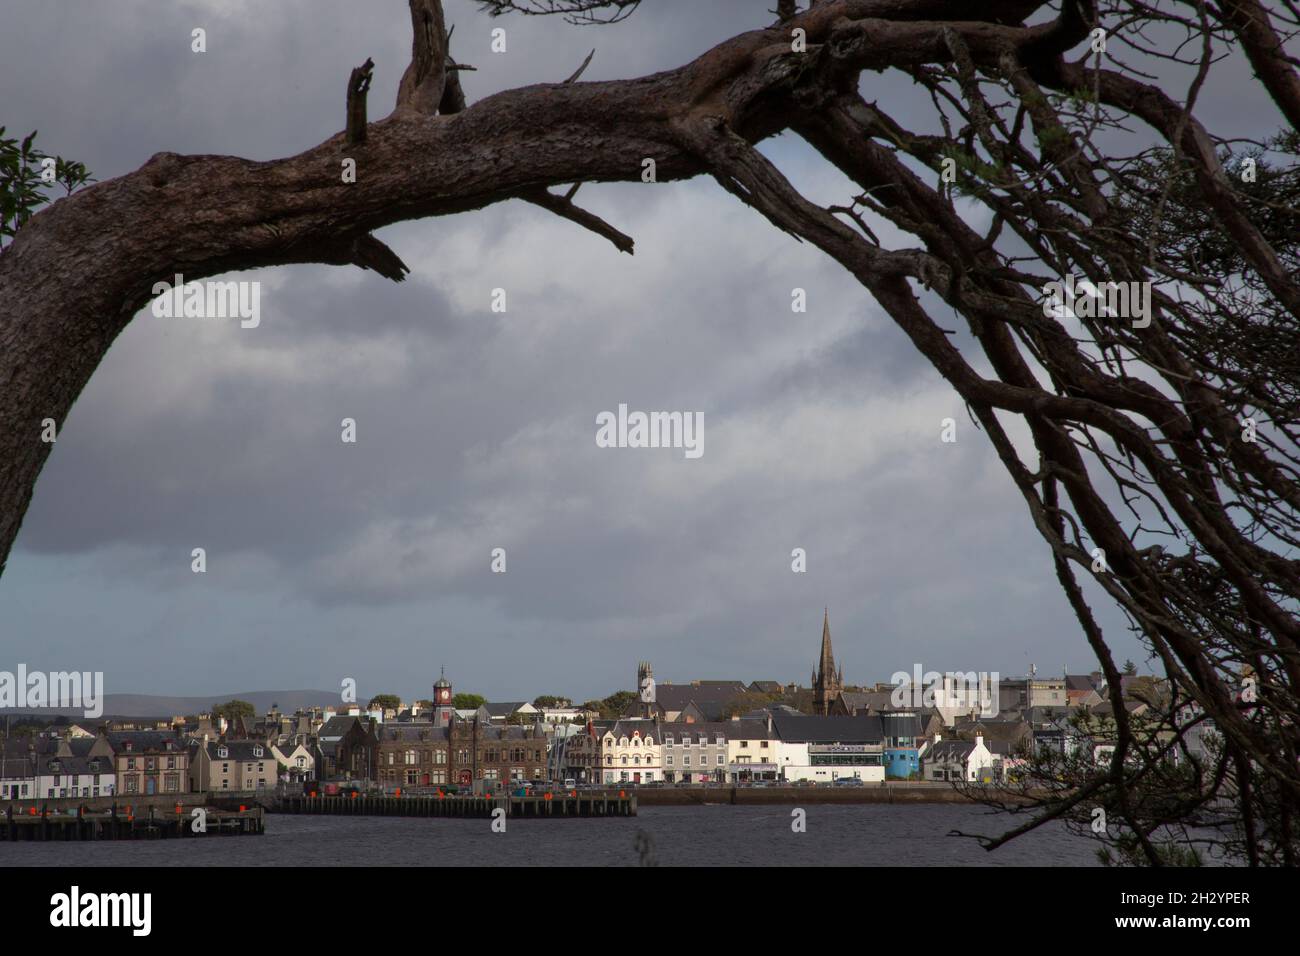 Stornoway habour and town seen from the Lews Castle Grounds, Stornoway, Isle of Lewis, Outer Hebrides, Scotland, UK Stock Photo